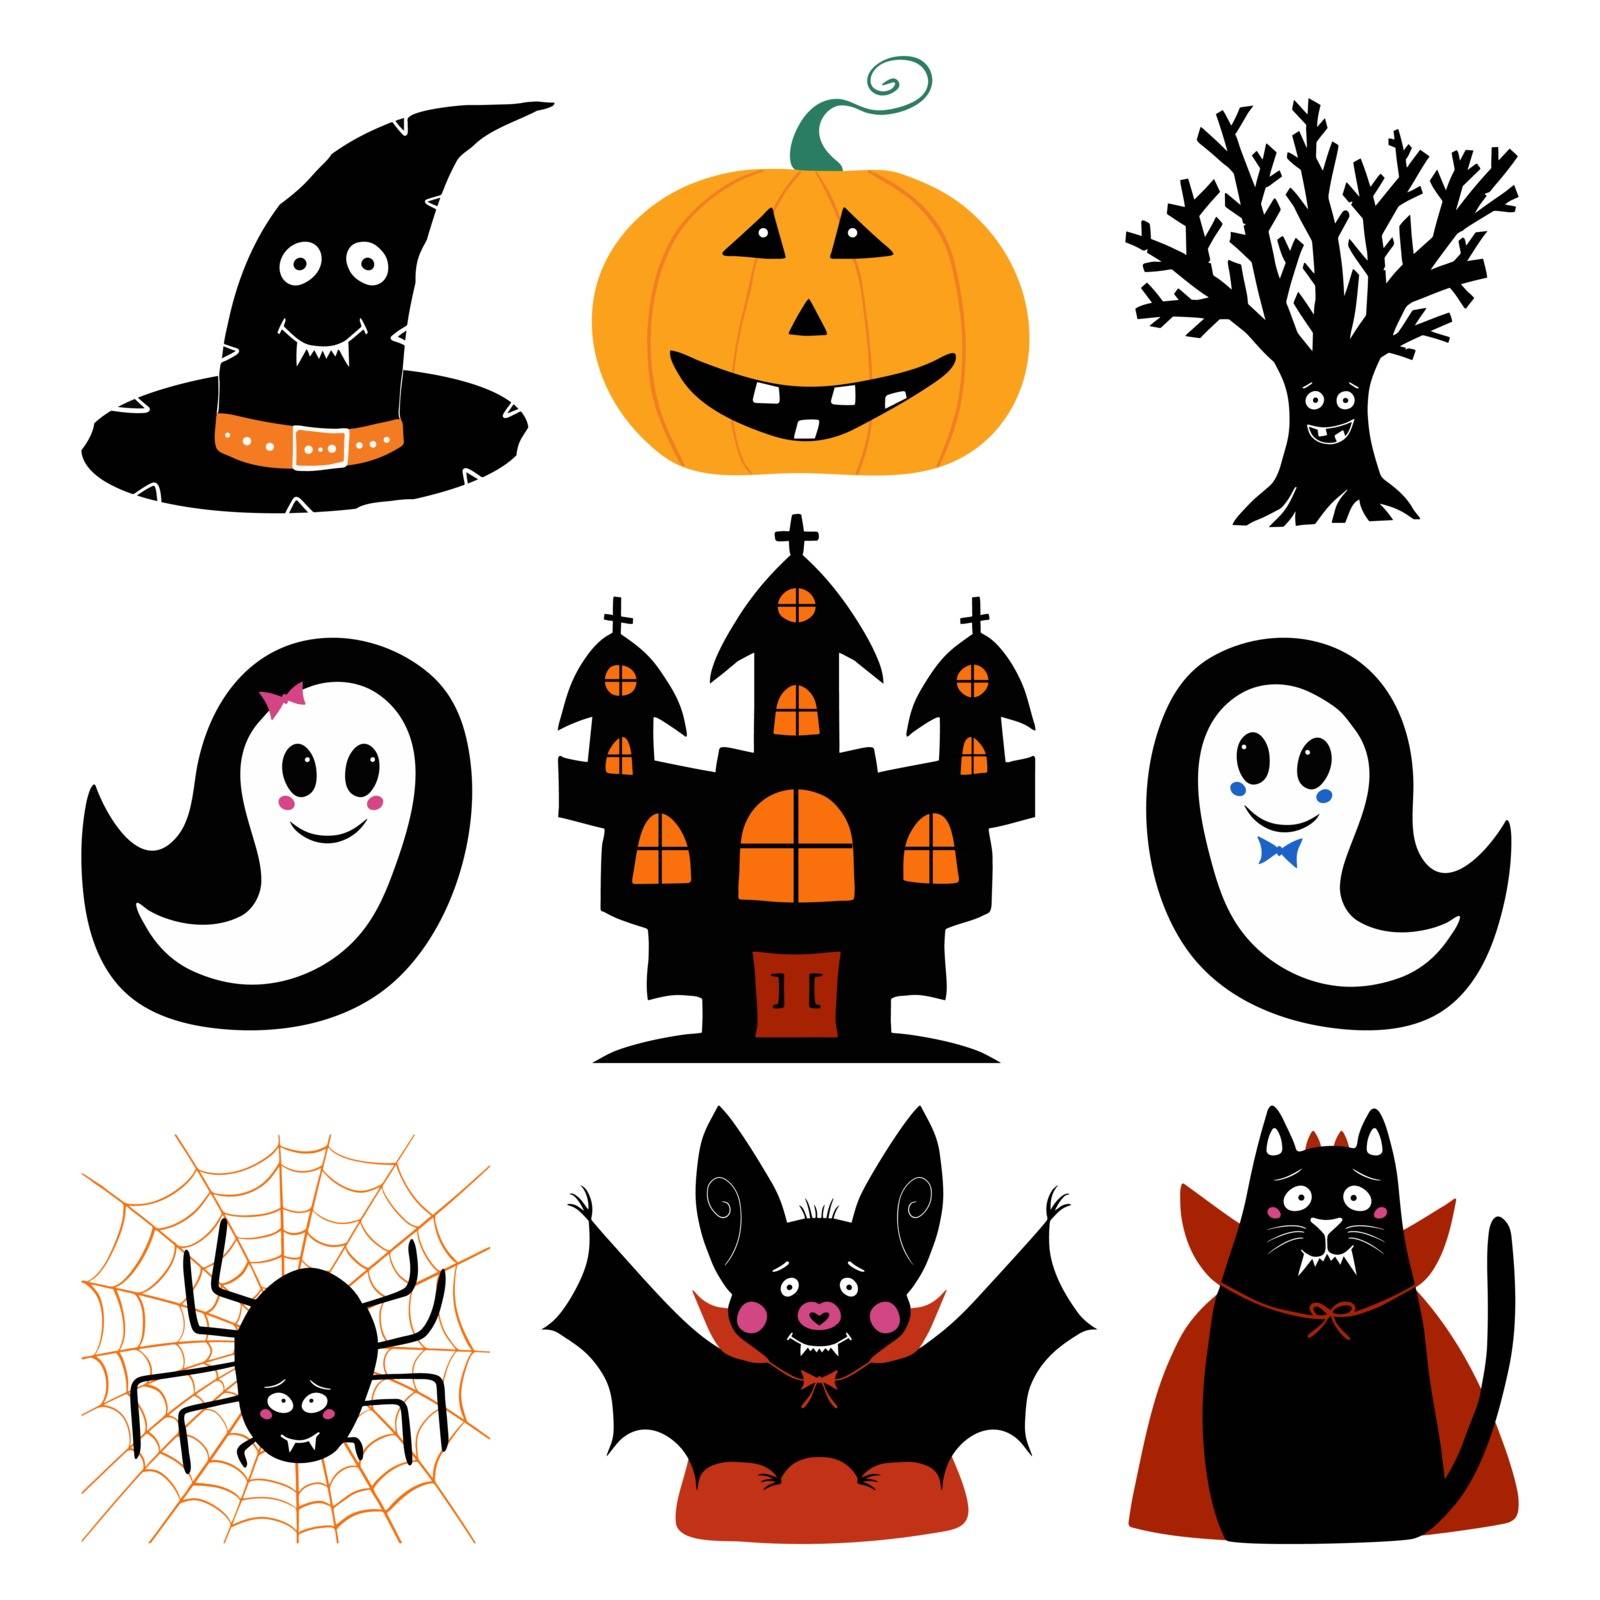 Jack o lantern, witch hat, dry tree, ghost, castle, bat, cat, spider. Halloween characters set. Isolated on white background. Vector stock illustration. by anna_artist